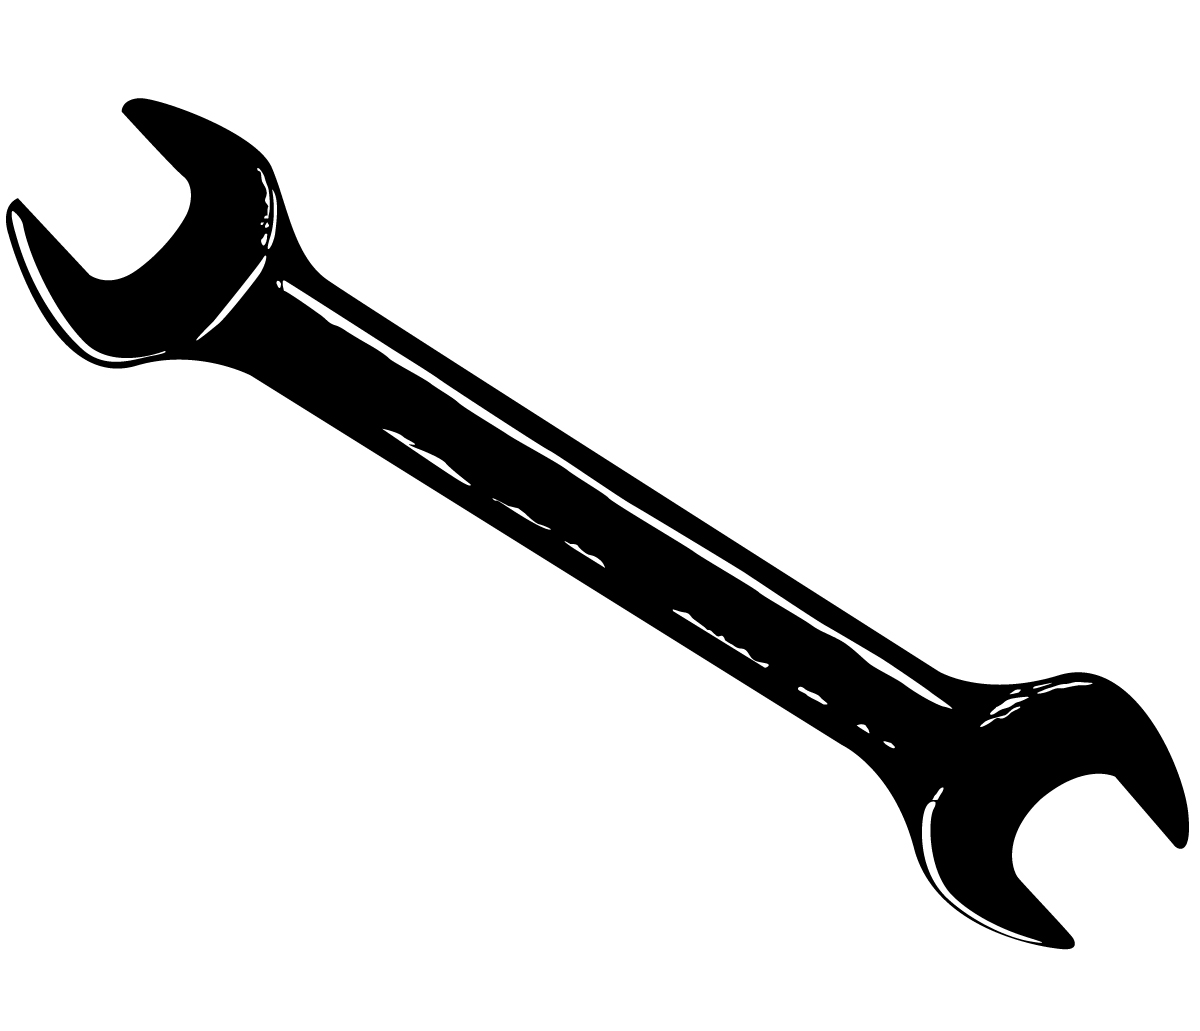 HQ Wrench Wallpapers | File 94.64Kb